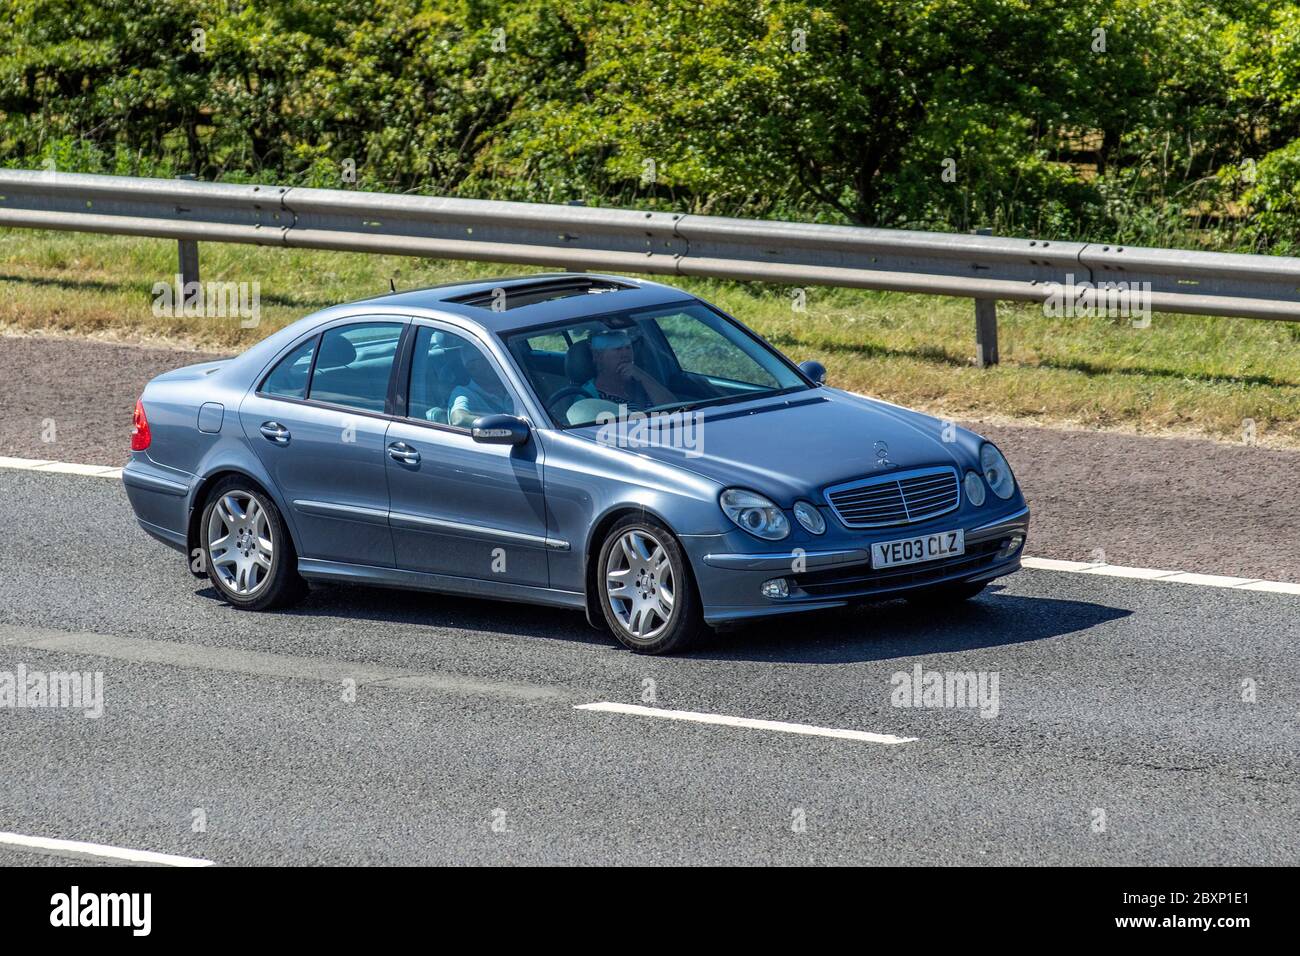 2003 blue Mercedes Benz E Class E320 CDI Avantgarde S210 Auto Estate Diesel Automatic; Vehicular traffic moving vehicles, cars driving vehicle on UK roads, motors, motoring on the M6 motorway highway Stock Photo